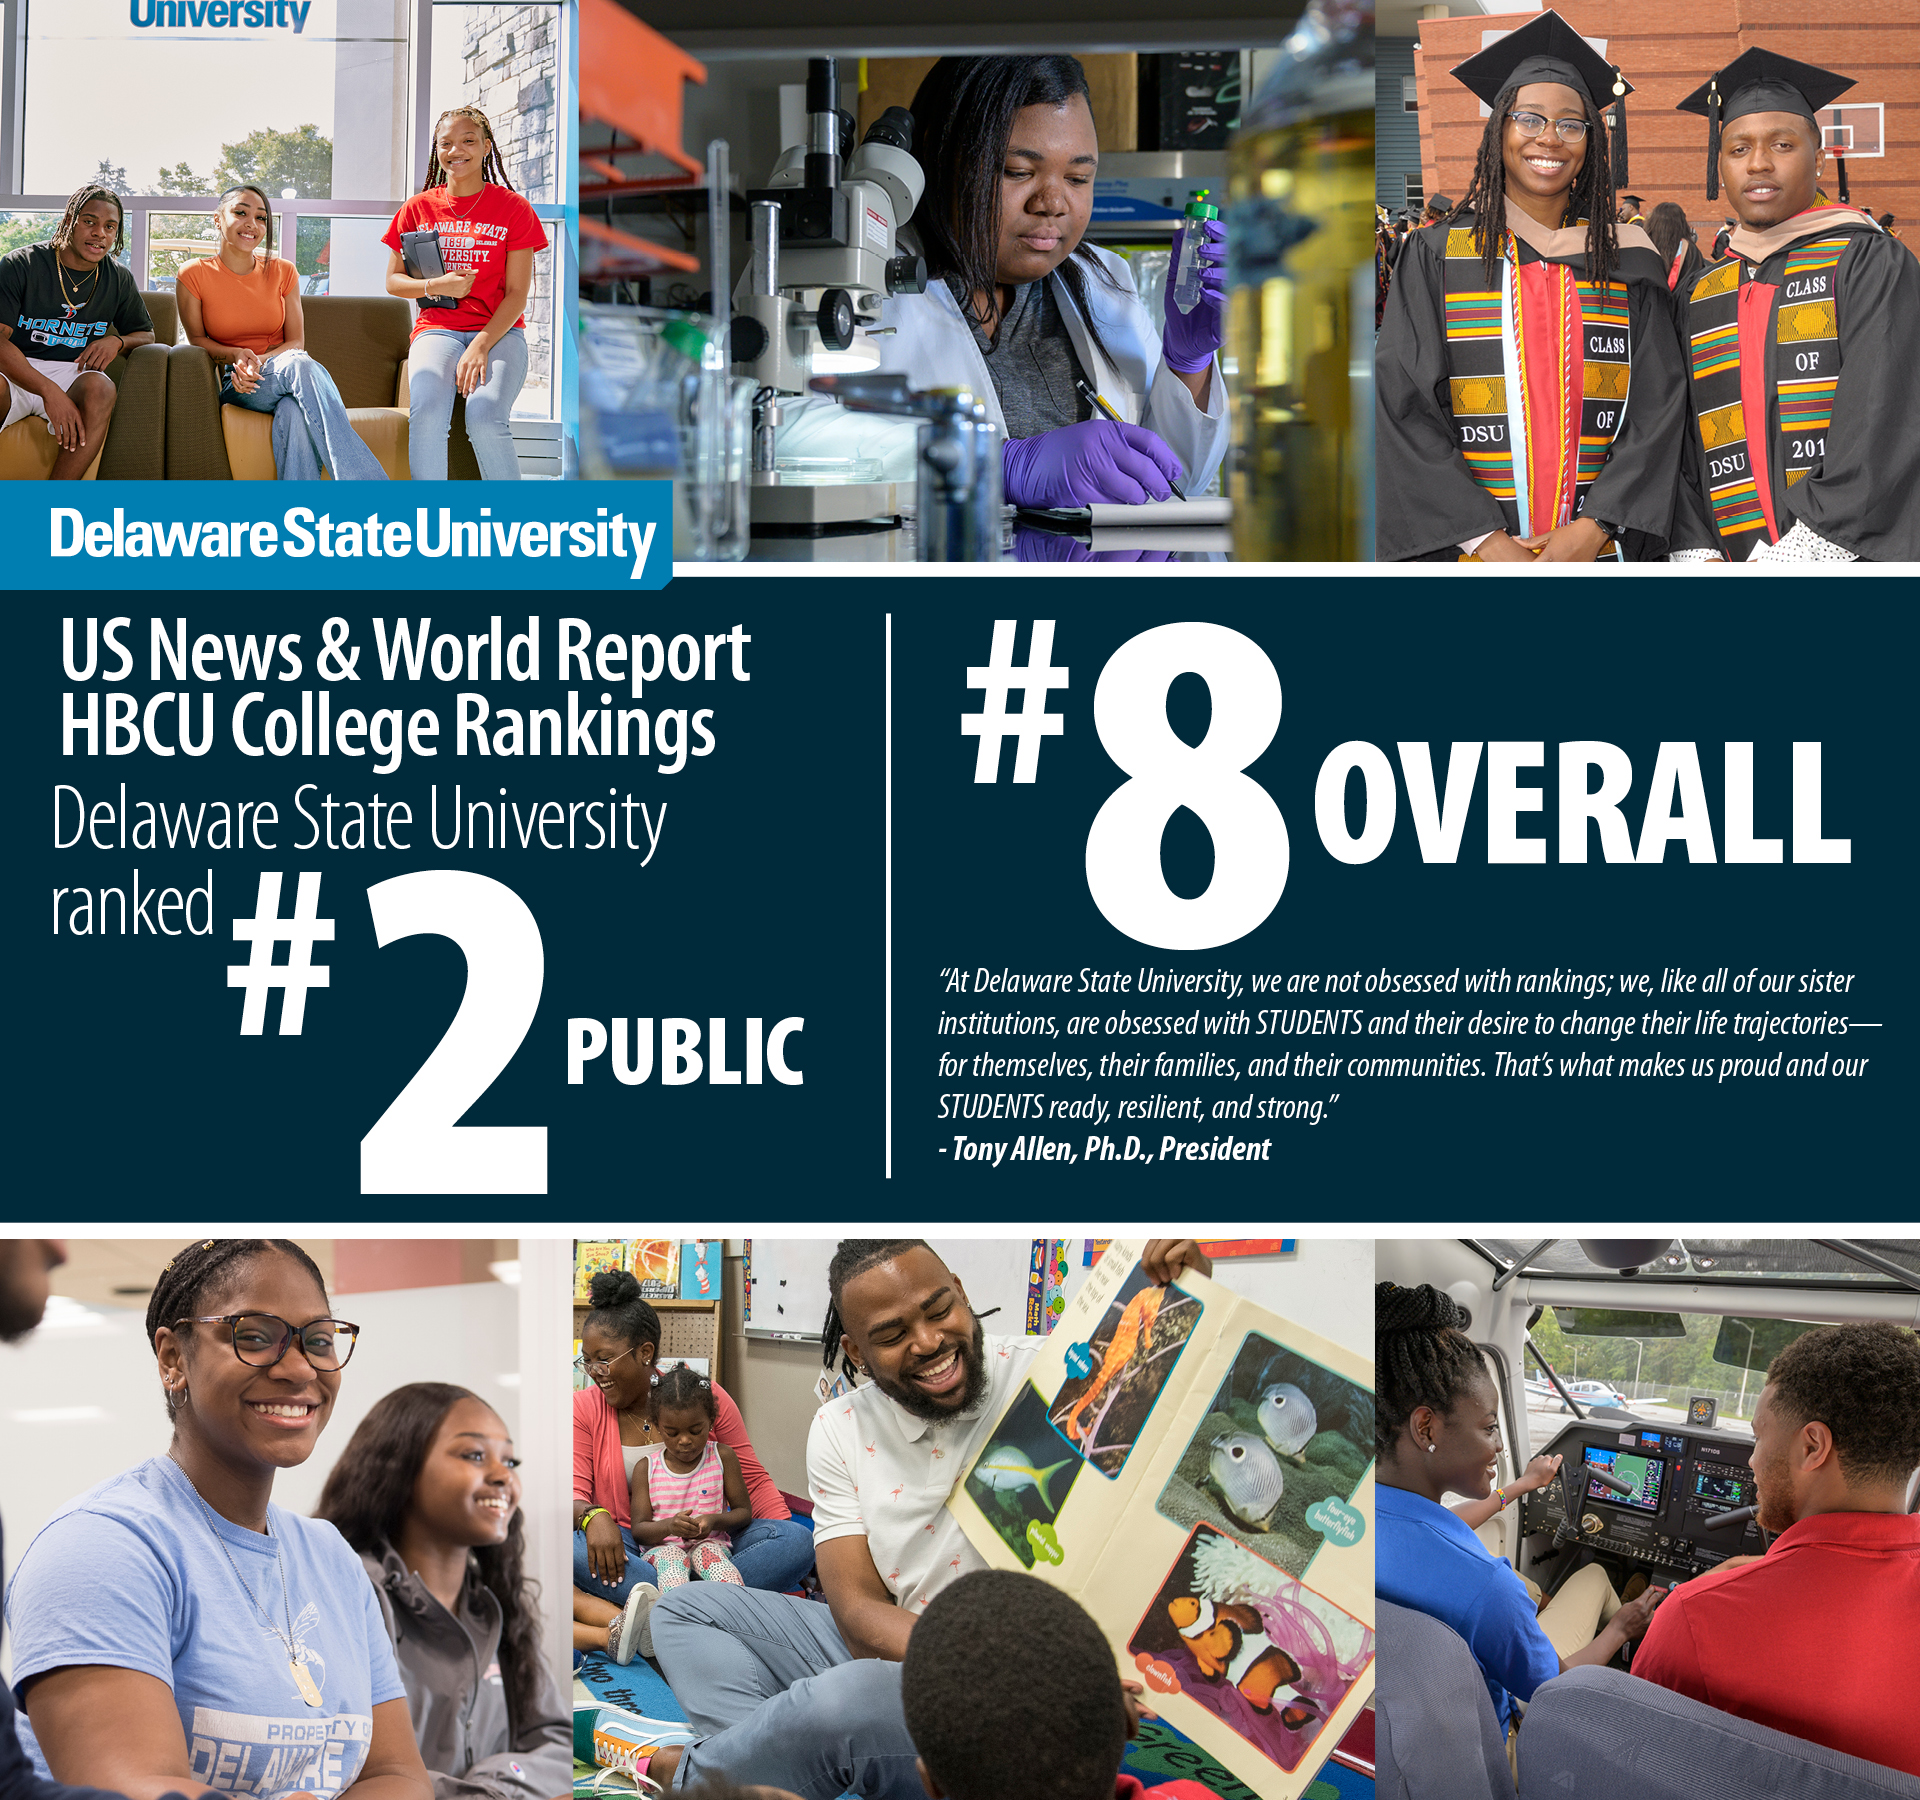 The University’s rise among HBCUs continued with the release of the annual U.S. News & World Report “Best Colleges" rankings.